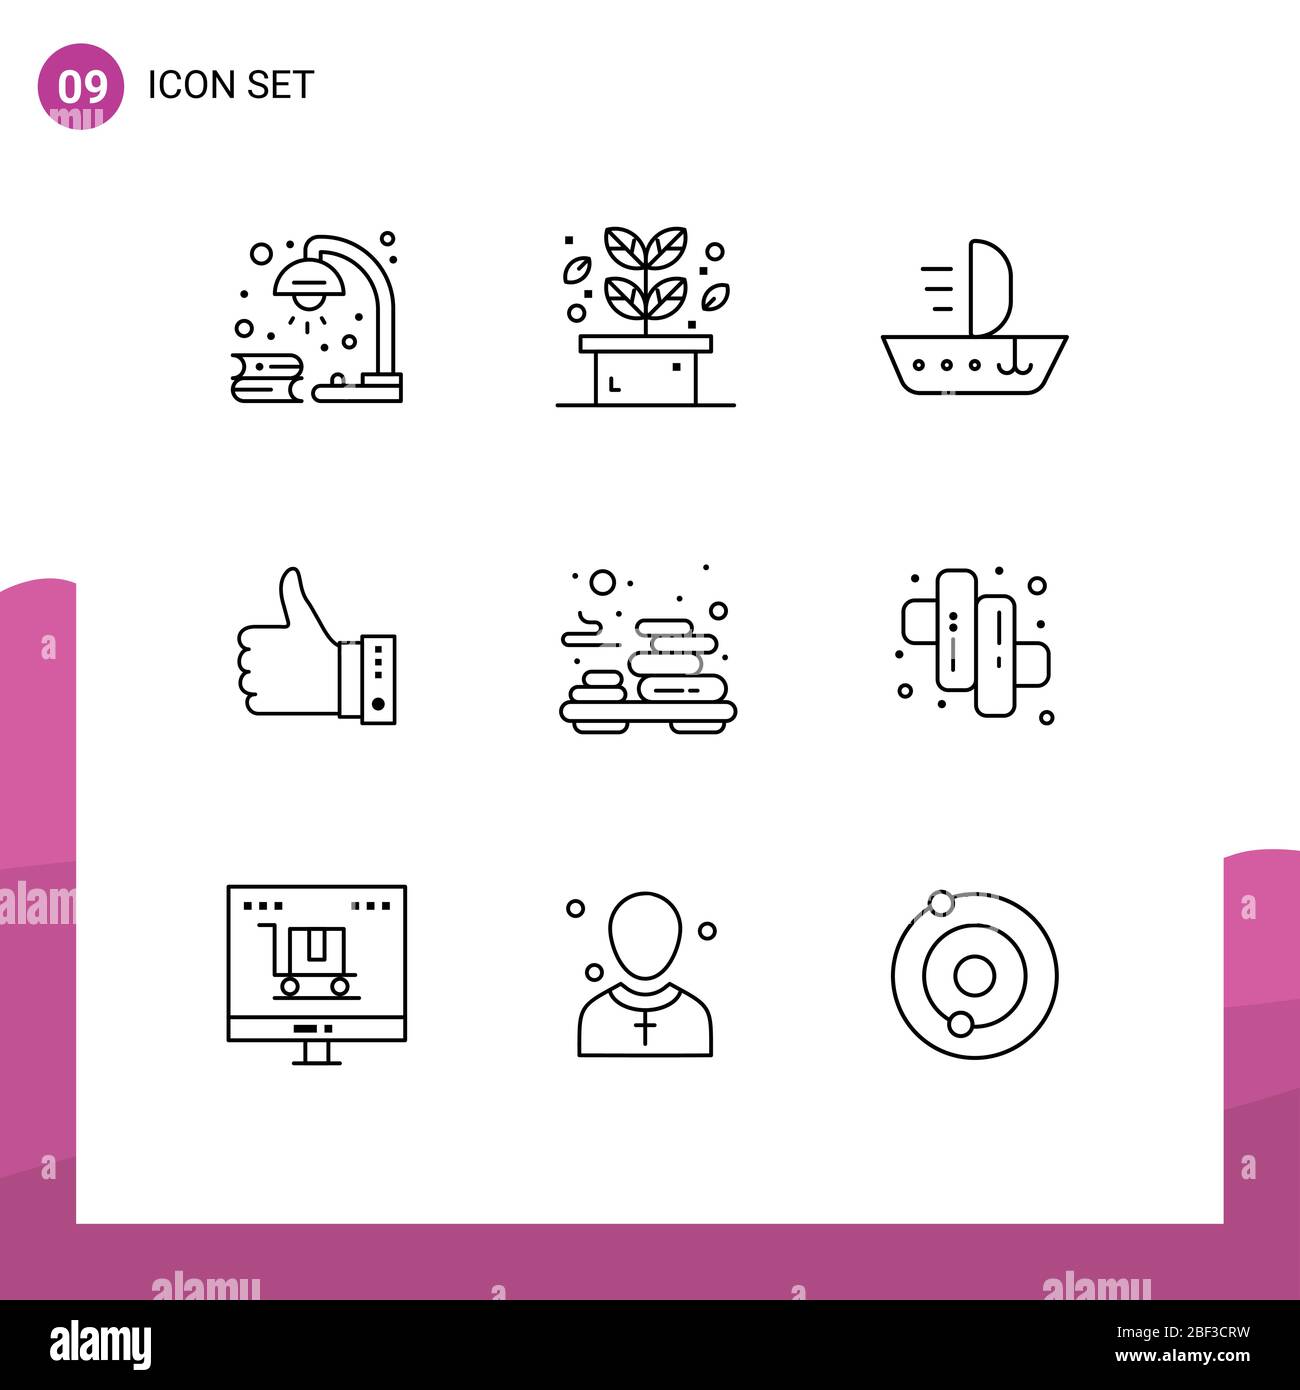 Pictogram Set of 9 Simple Outlines of thumbs, gesture, spa, finger, vessel Editable Vector Design Elements Stock Vector